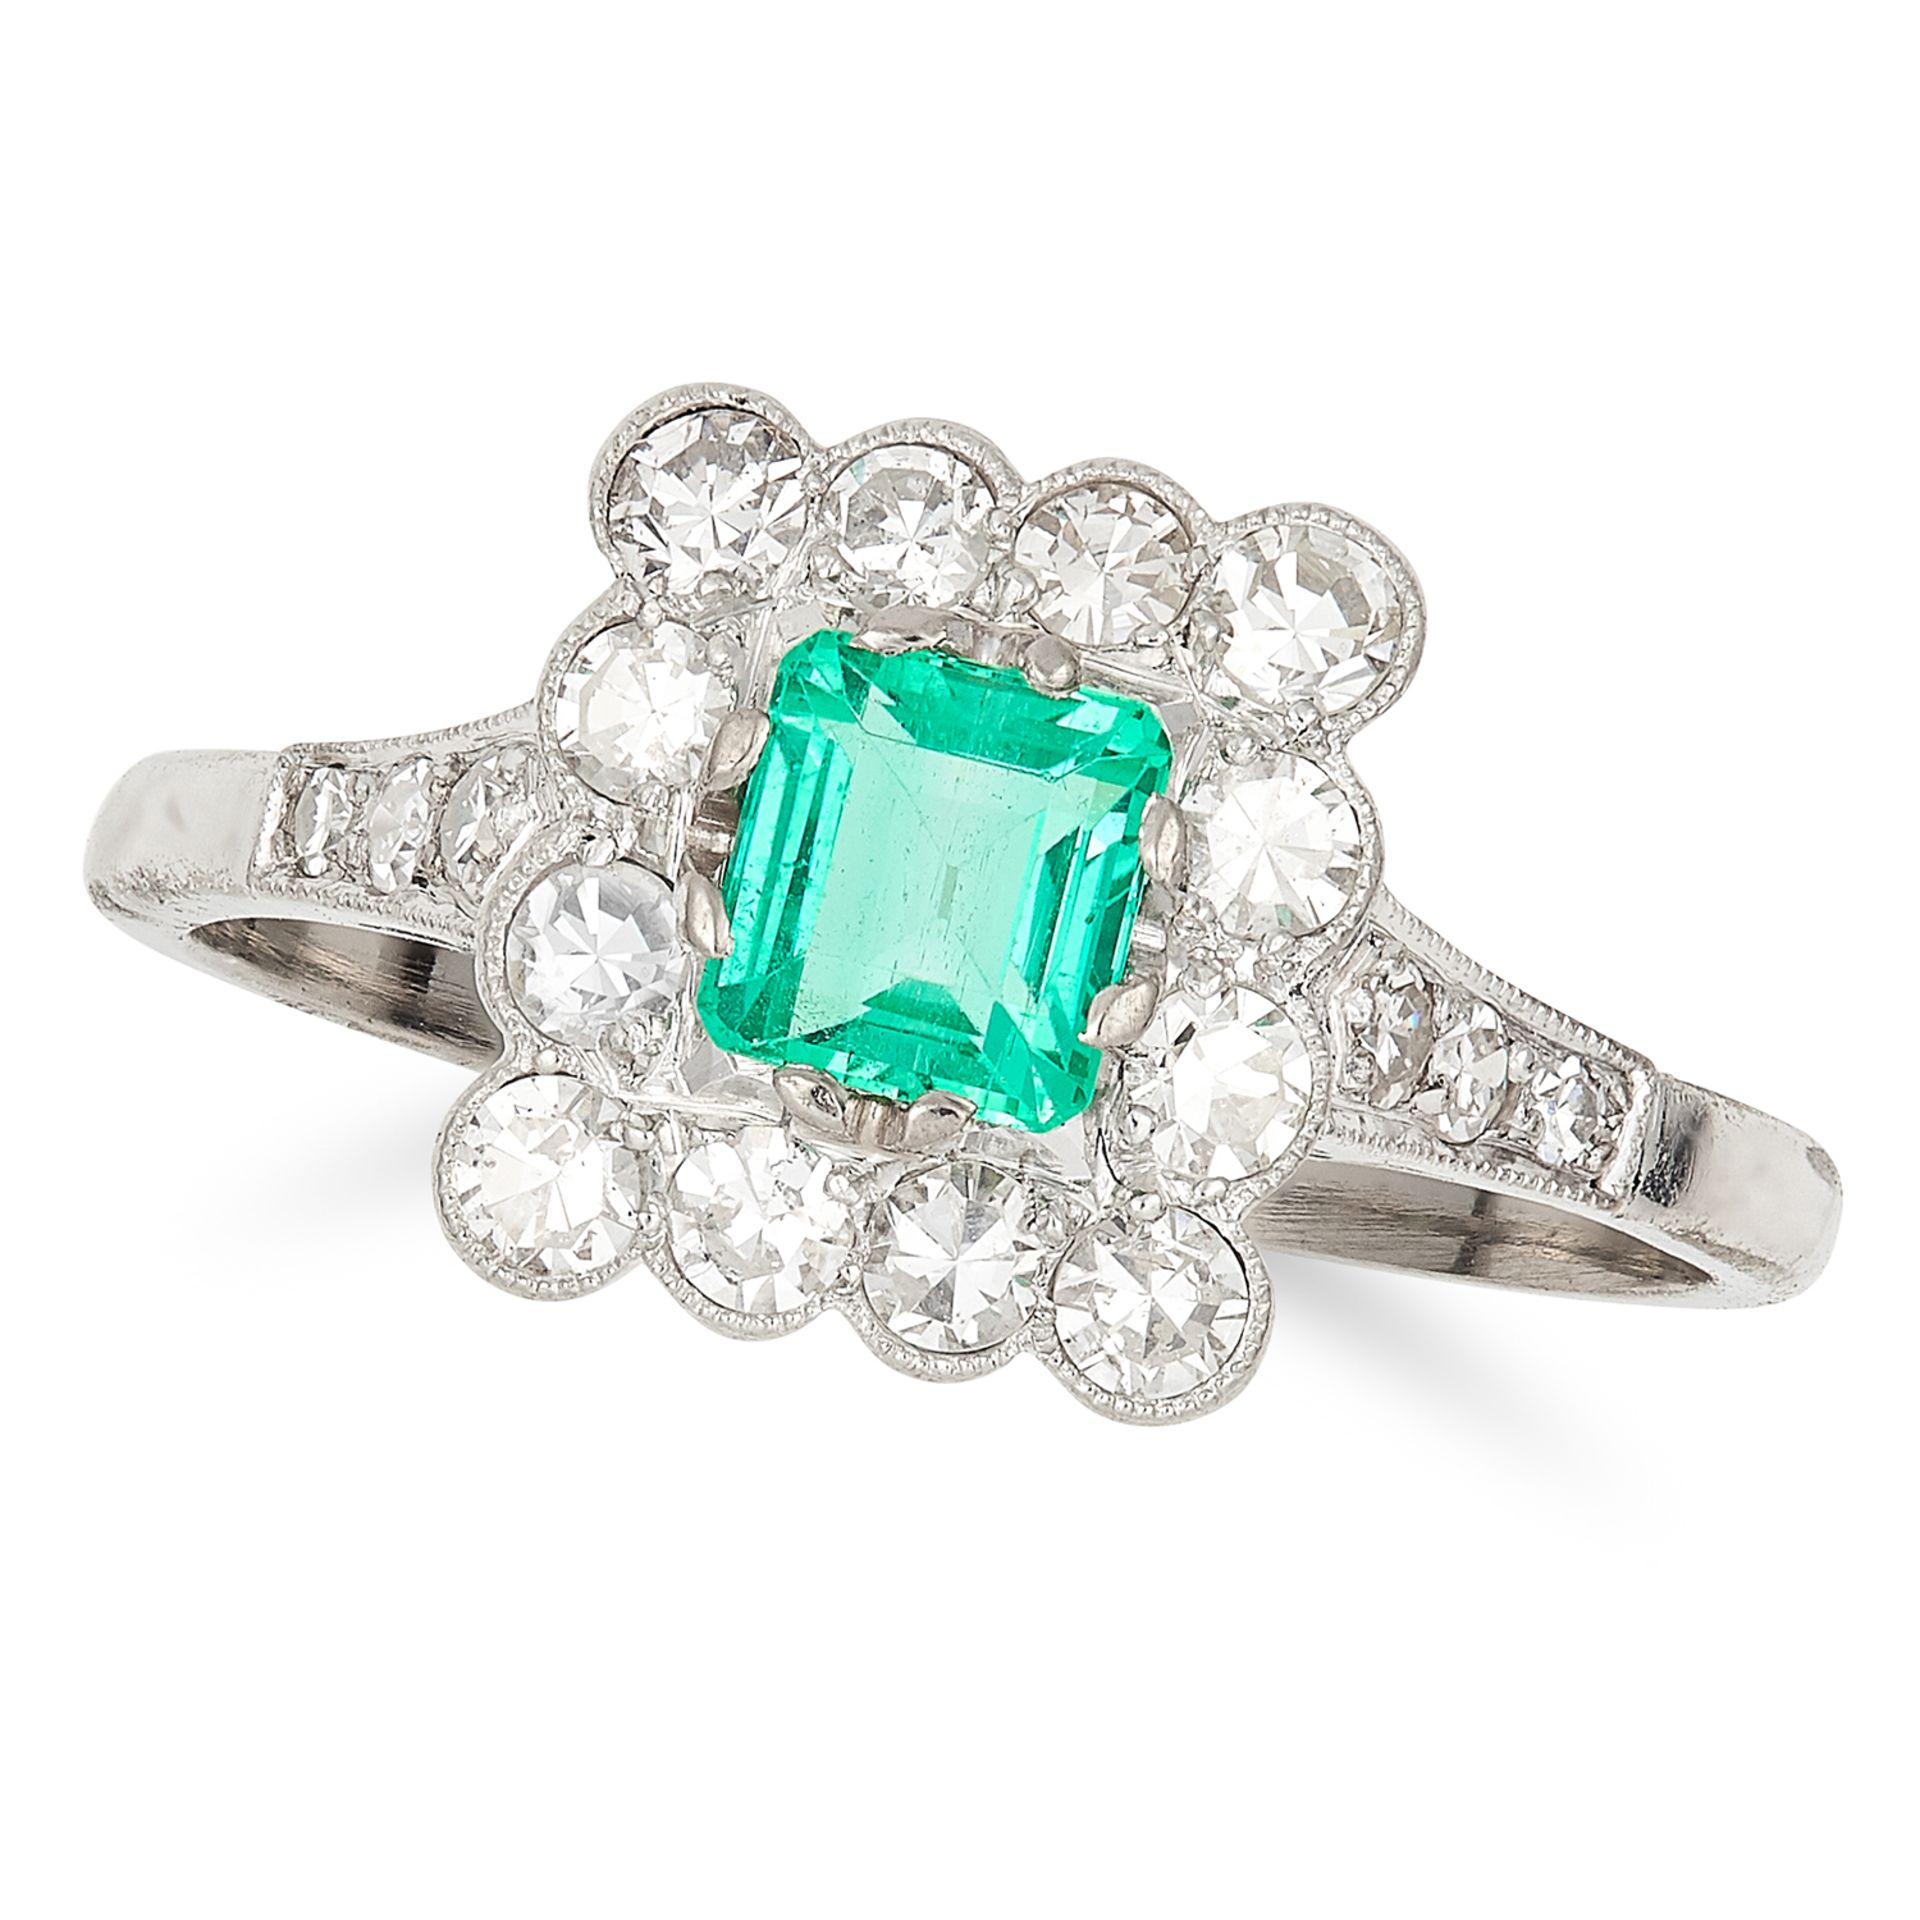 0.42 CARAT EMERALD AND DIAMOND CLUSTER RING in white gold or platinum, set with an emerald cut